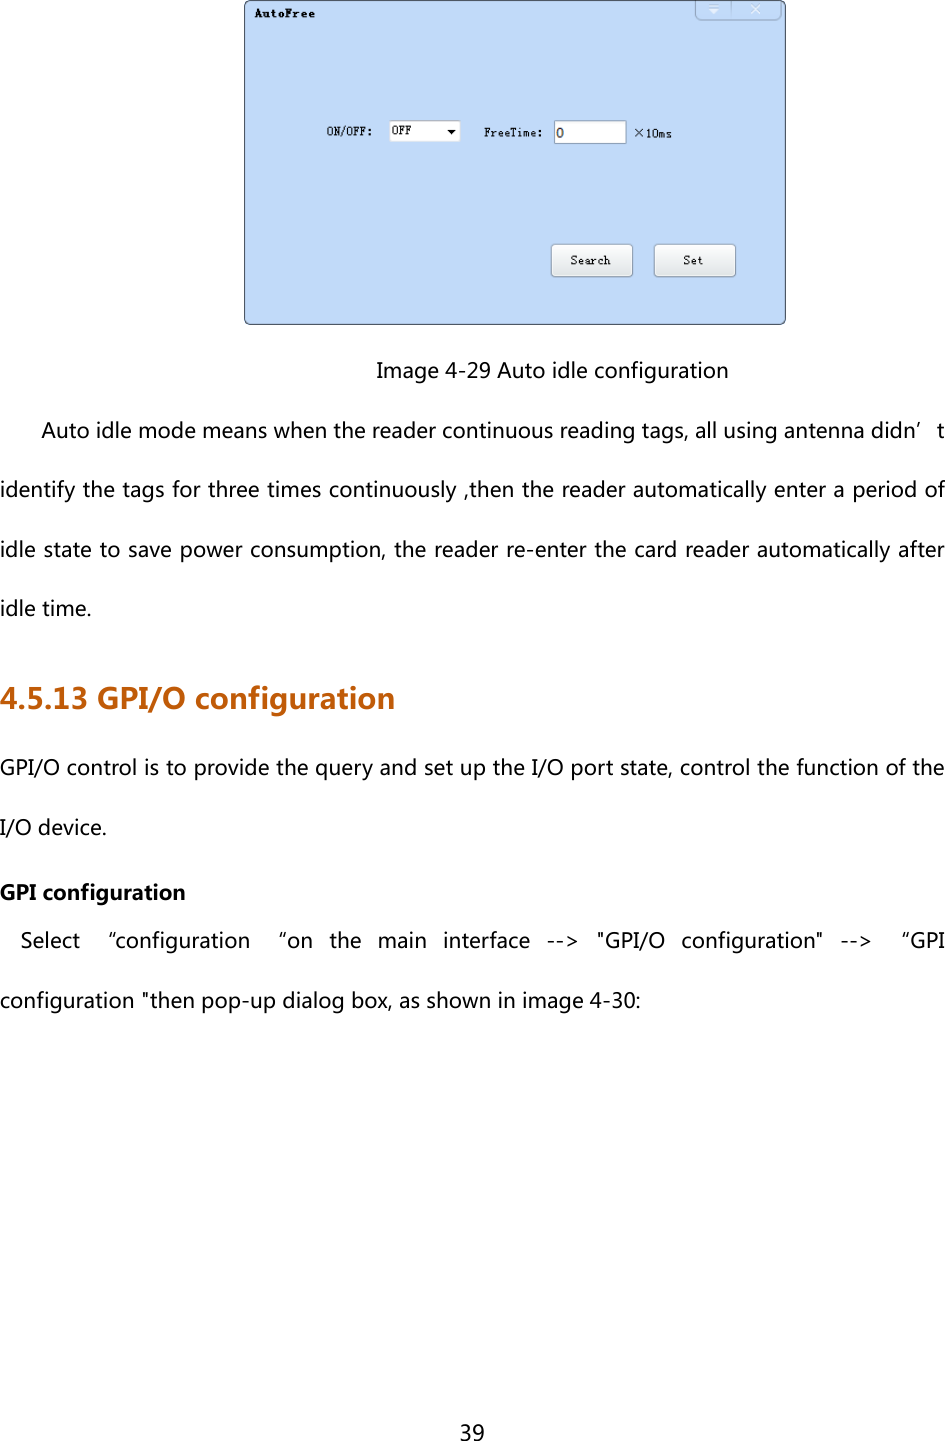  39                Image 4-29 Auto idle configuration Auto idle mode means when the reader continuous reading tags, all using antenna didn’t identify the tags for three times continuously ,then the reader automatically enter a period of idle state to save power consumption, the reader re-enter the card reader automatically after idle time. 4.5.13 GPI/O configuration GPI/O control is to provide the query and set up the I/O port state, control the function of the I/O device. GPI configuration Select  “configuration  “on  the  main  interface  --&gt;  &quot;GPI/O  configuration&quot;  --&gt;  “GPI configuration &quot;then pop-up dialog box, as shown in image 4-30: 